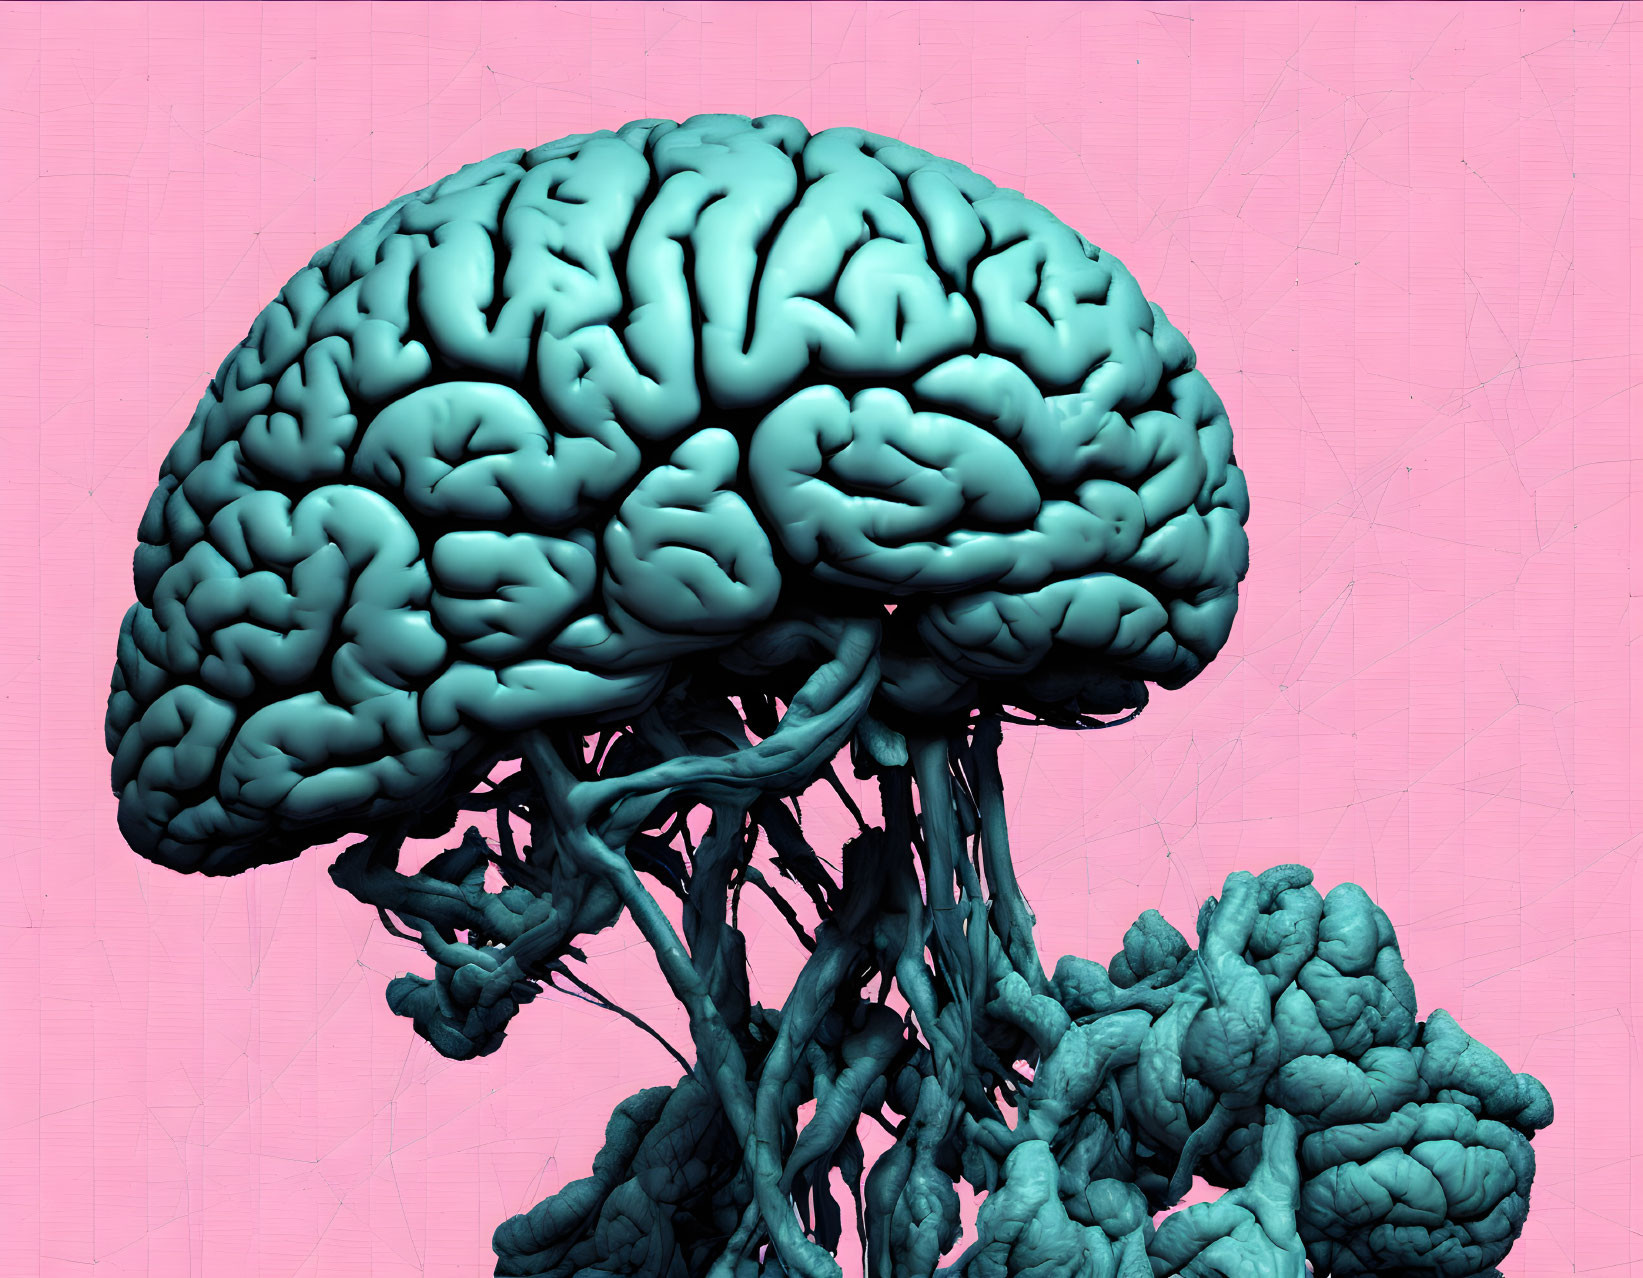 Intricate 3D human brain with roots on pink background